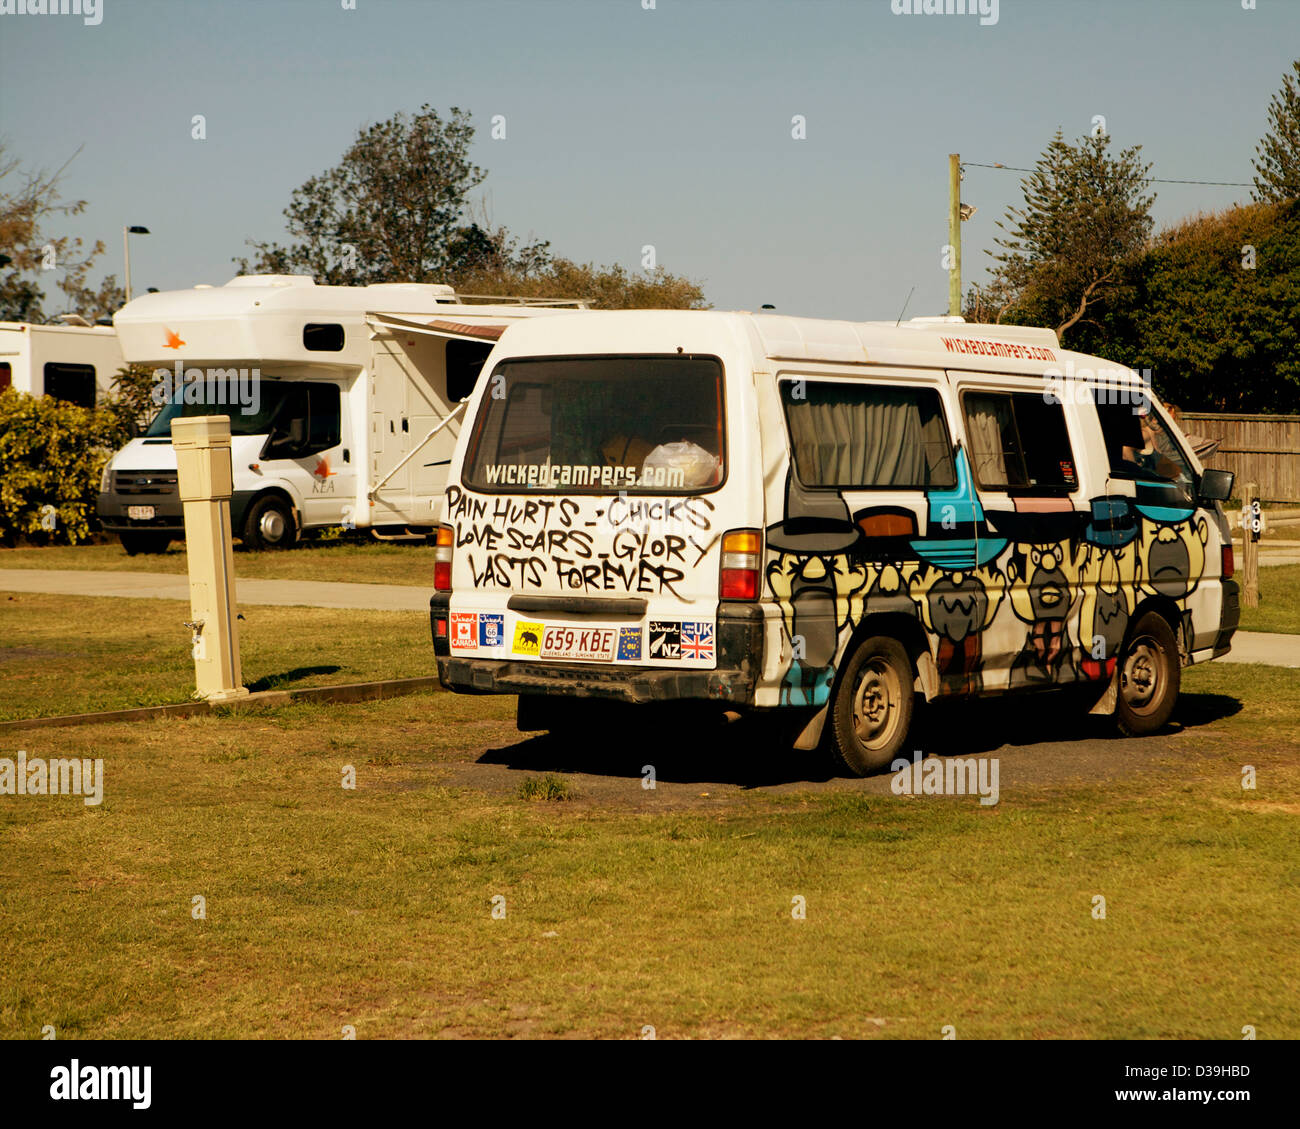 Volkswagen Campervan covered in graffiti as part of the company quirky branding parked at a campsite in Byron Bay, NSW, Australia. Stock Photo